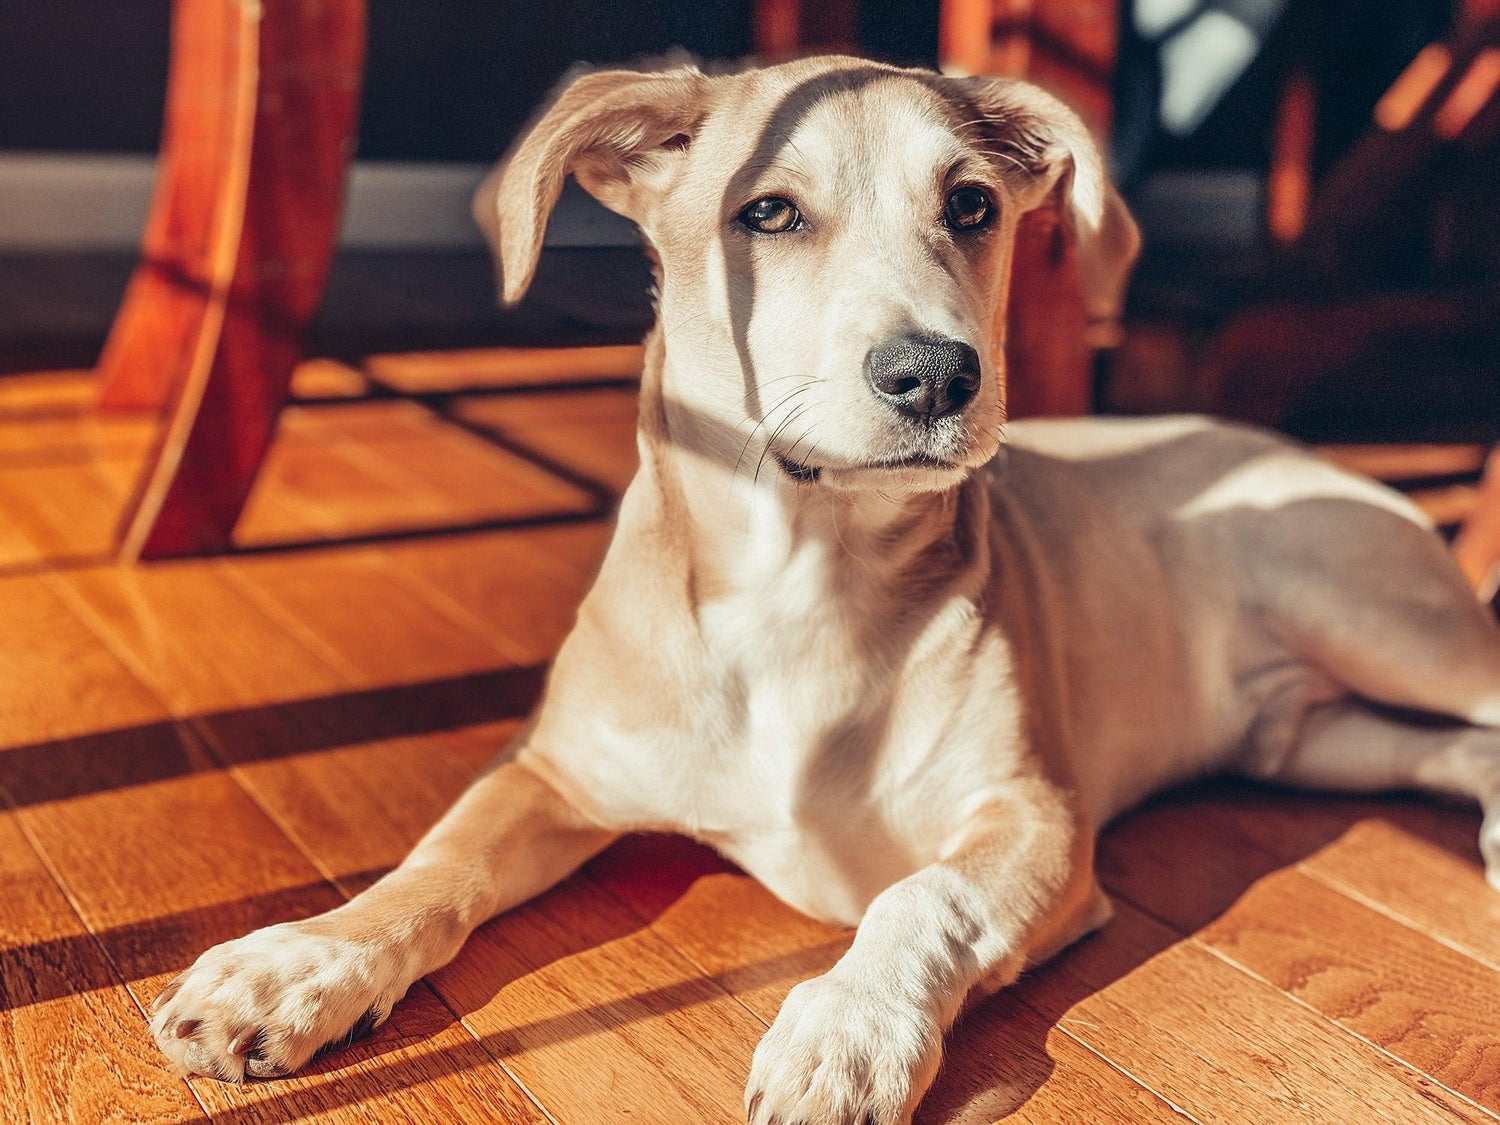 A dog laying on hardwood floors in the sun looking content